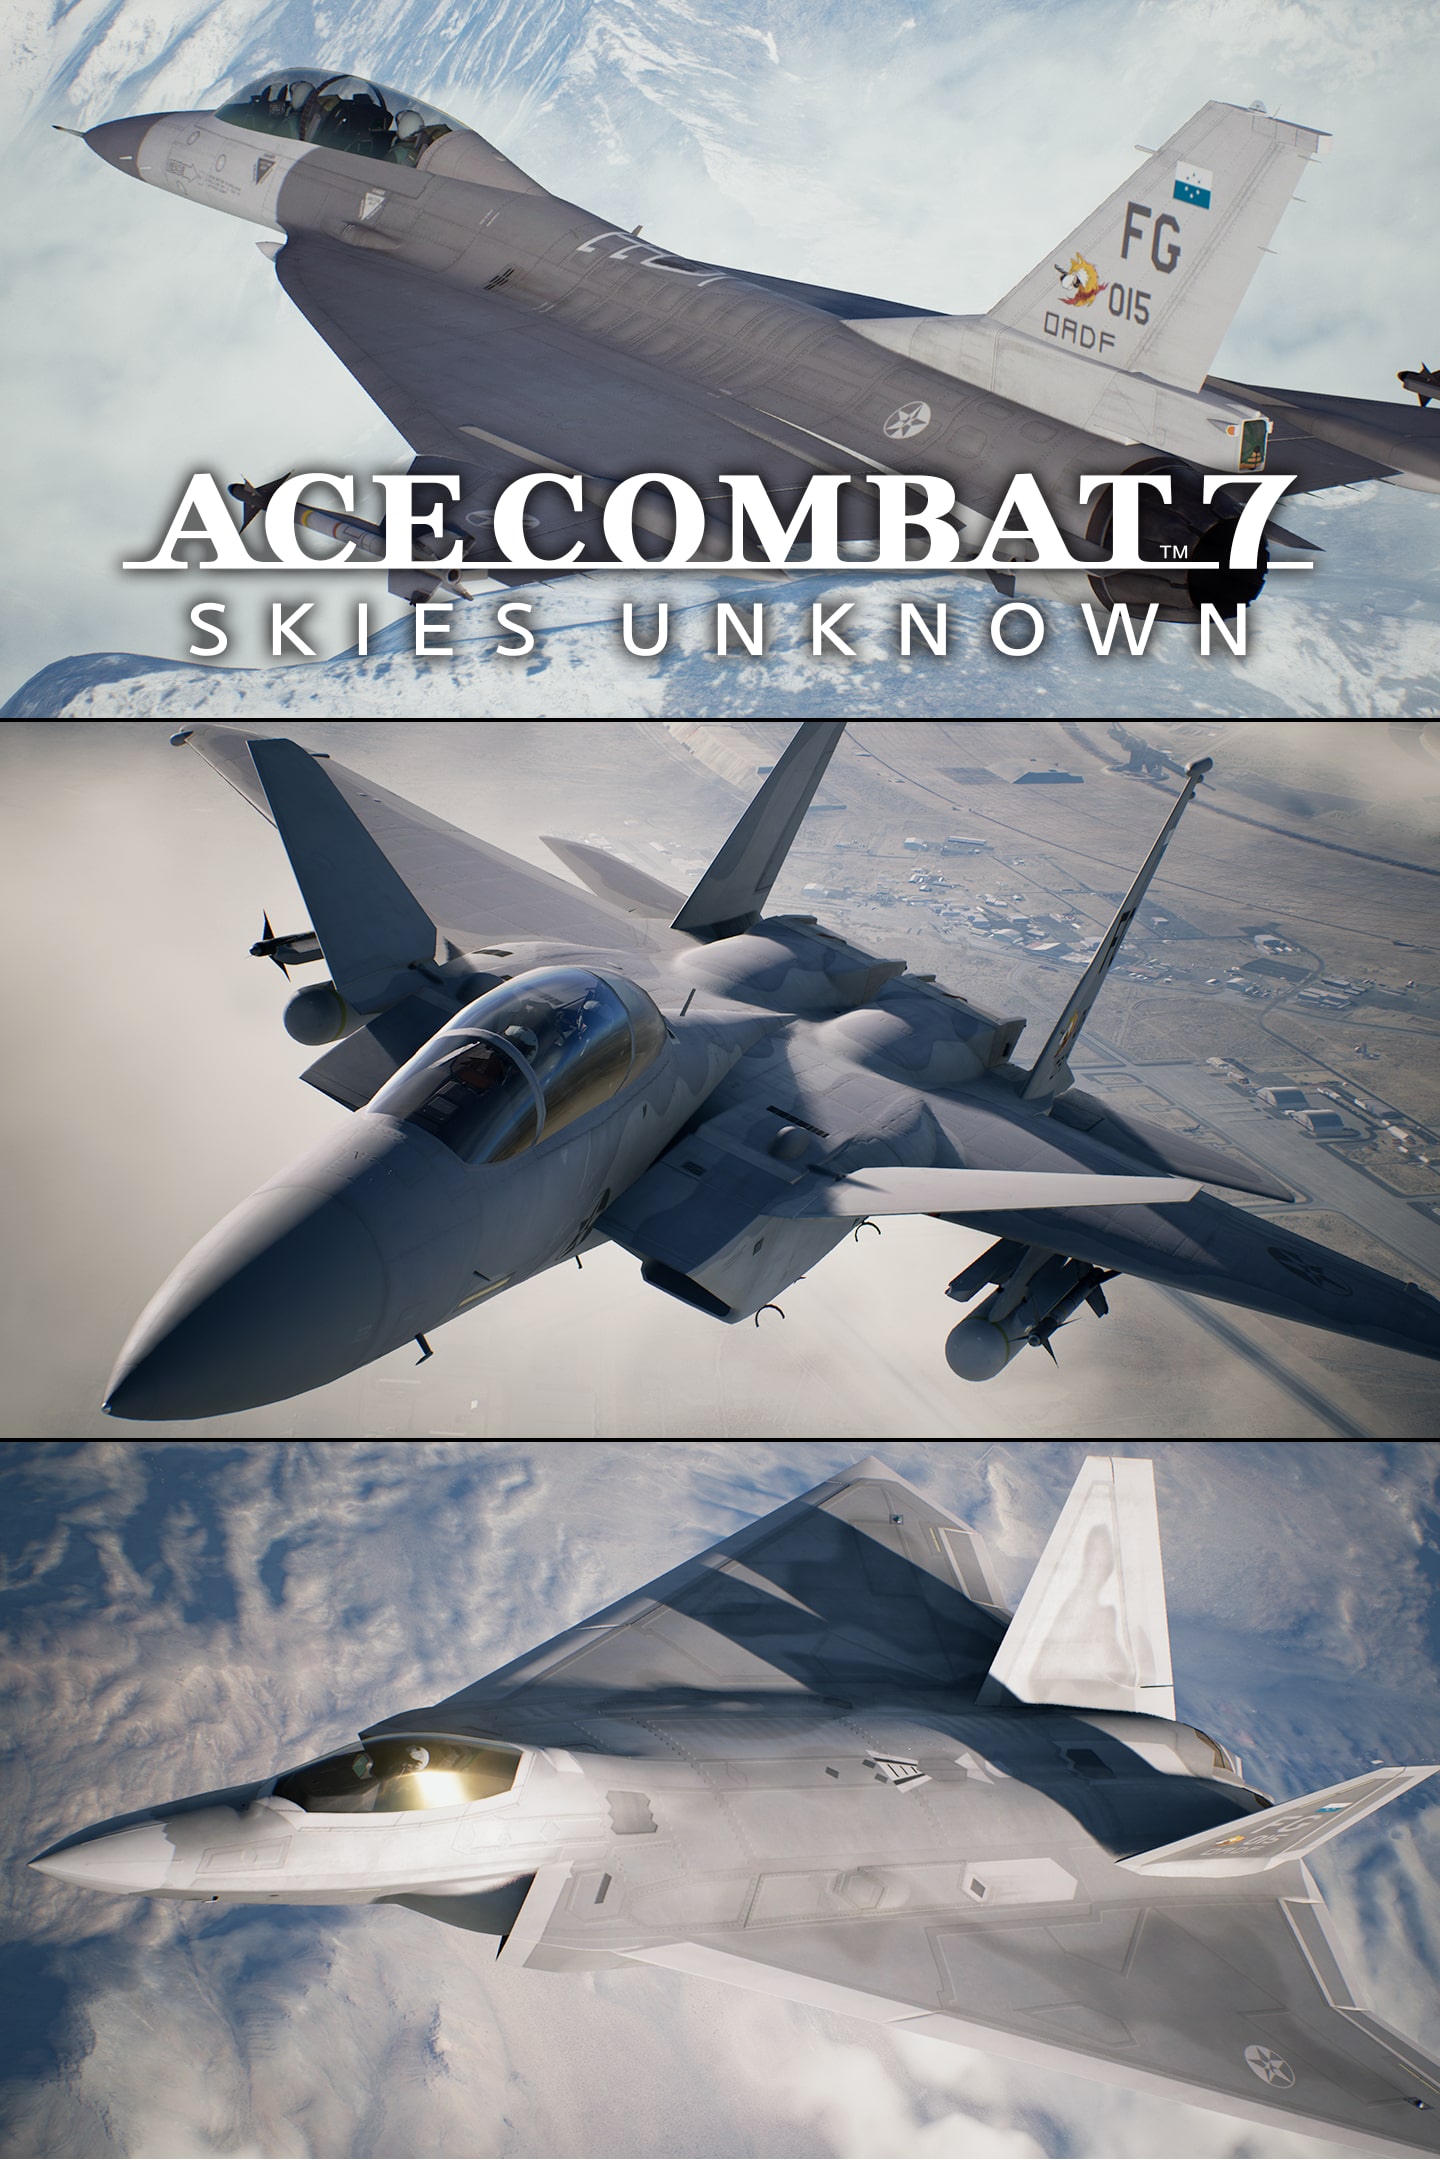 Ace Combat 7 DLC Packs Adding New Aircraft and Weapons From May